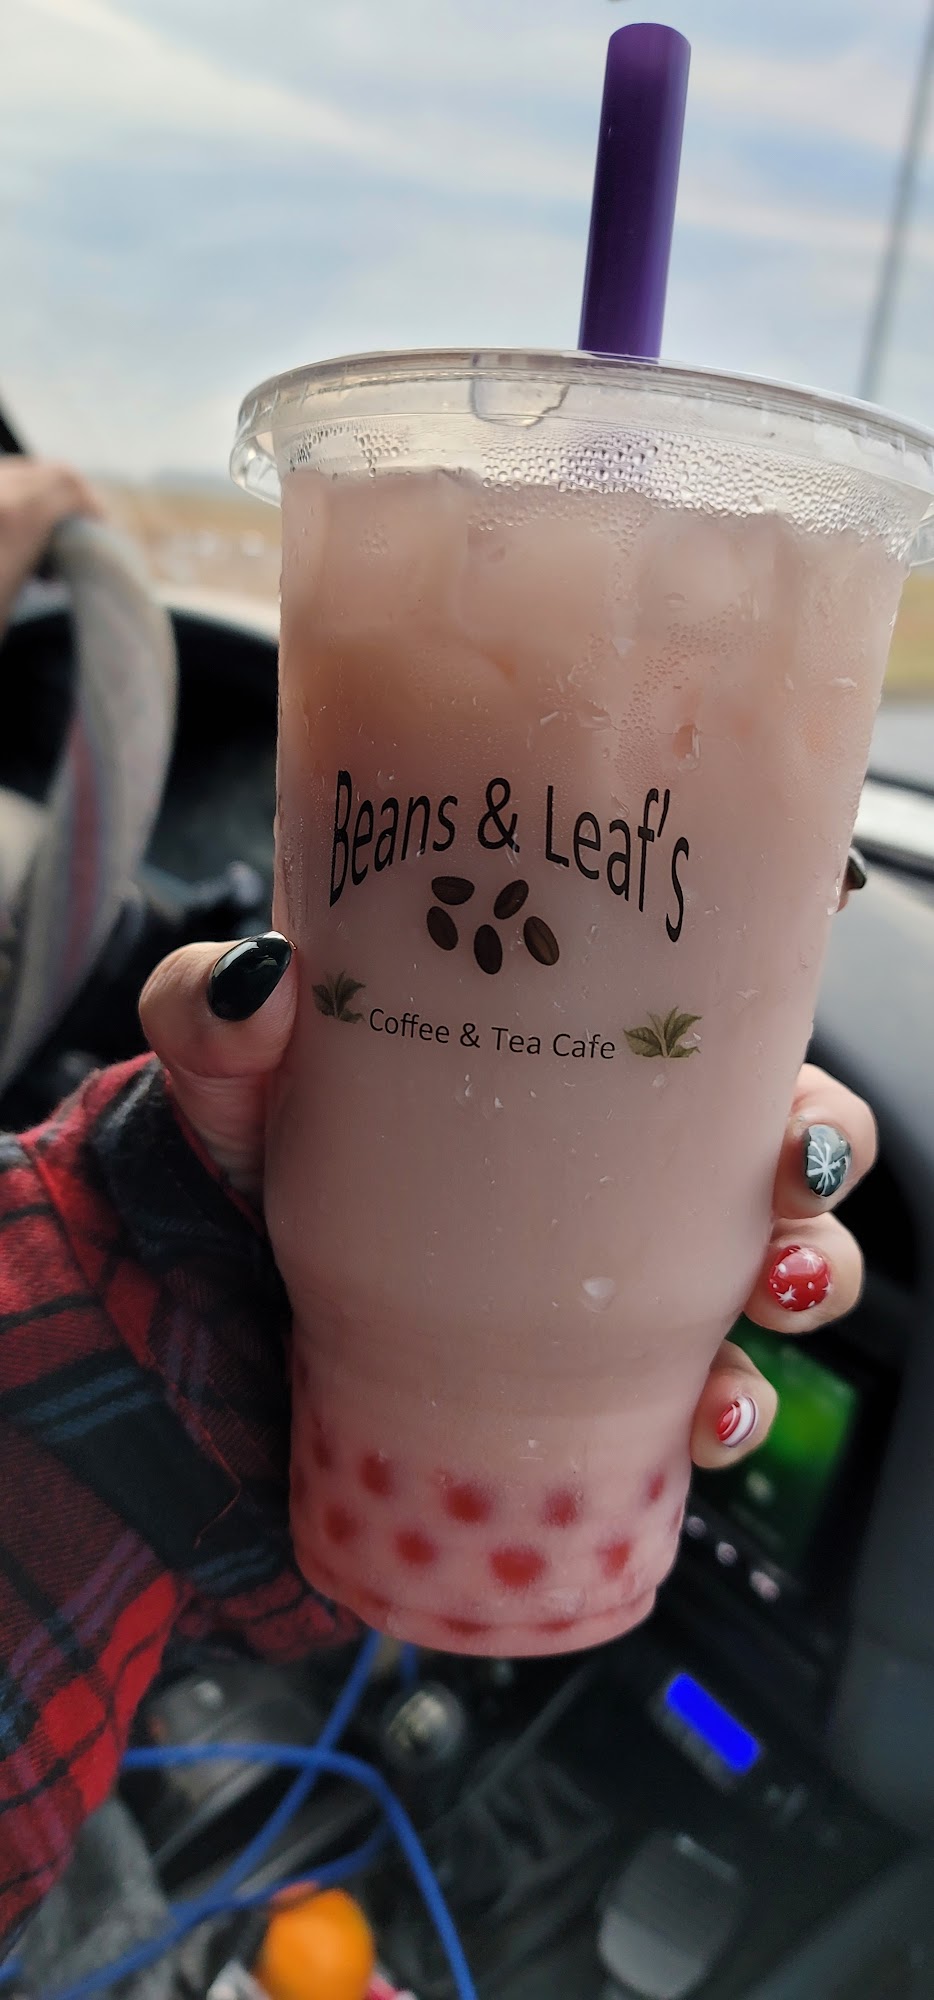 Beans and Leaf's Coffee Cafe